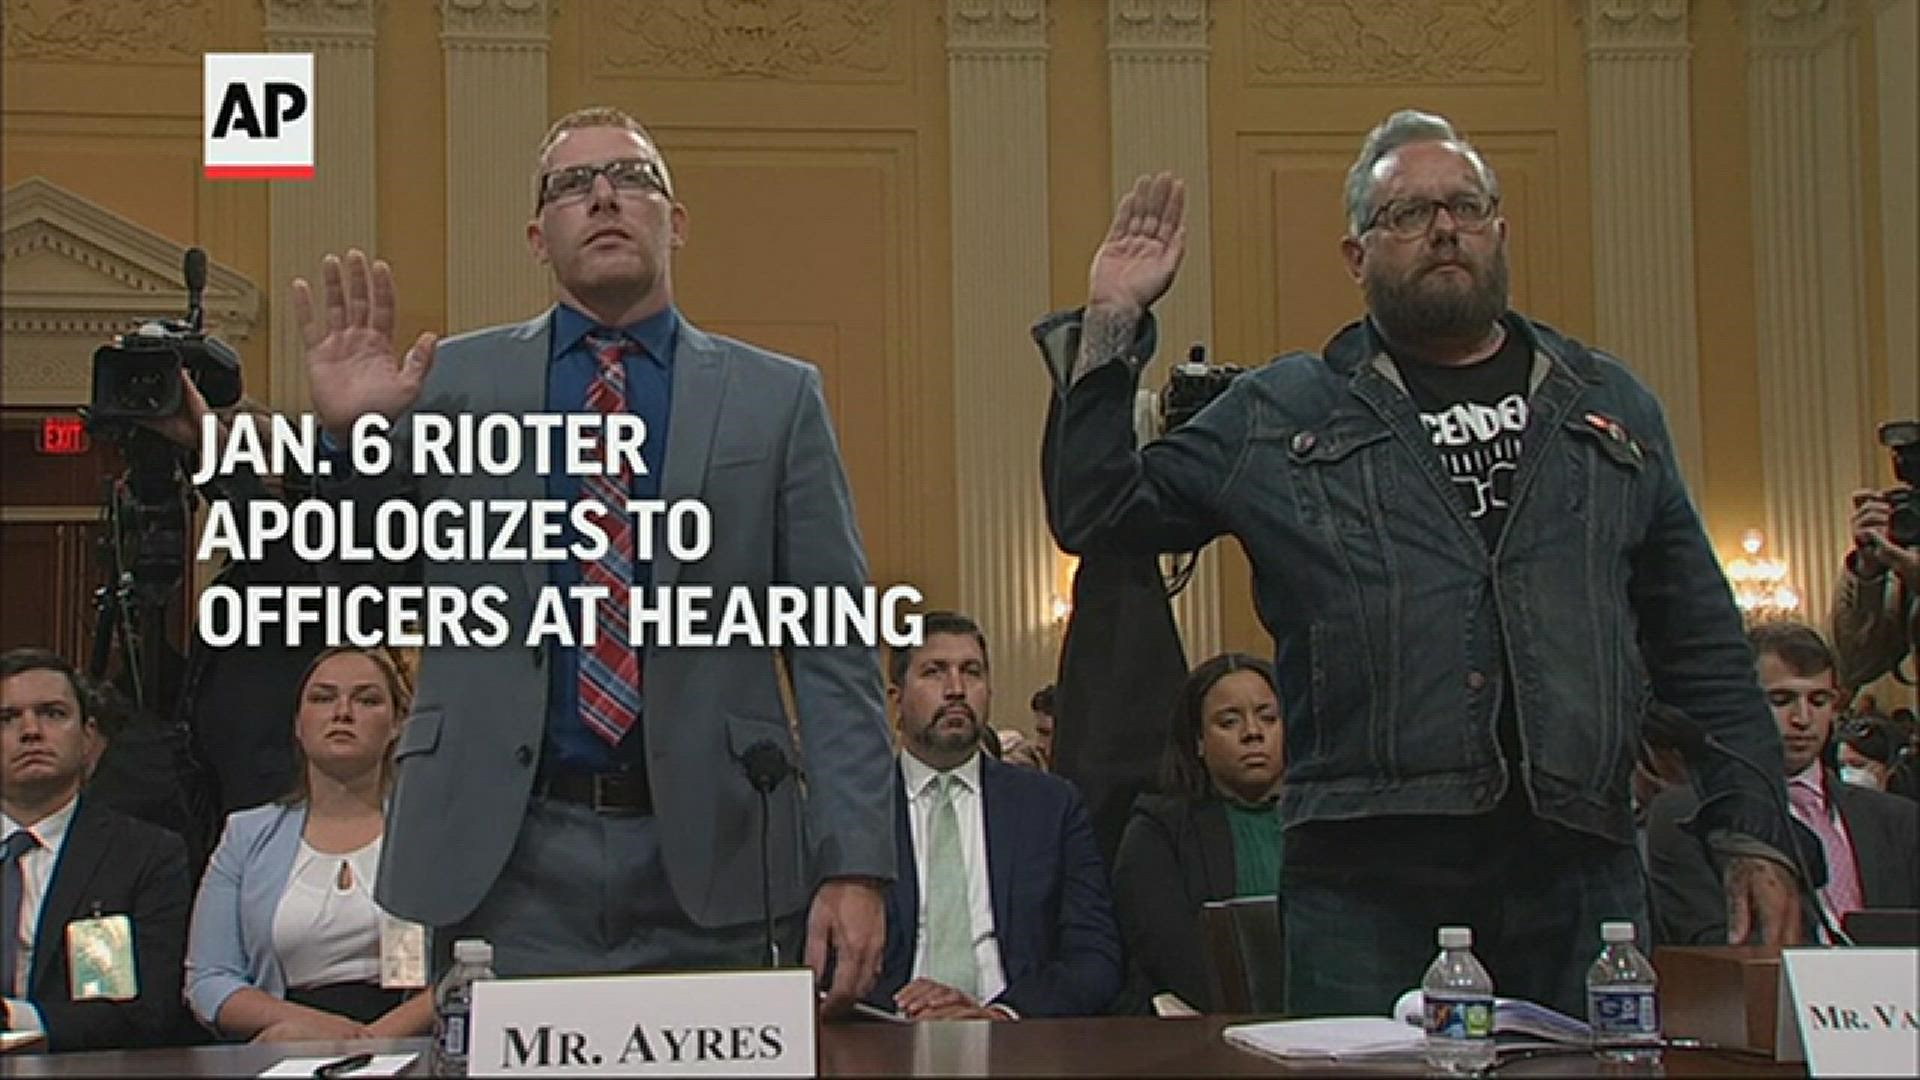 The House Jan. 6 Committee heard testimony Tuesday from two rioters who participated in the insurrection and insisted they were following calls from Trump.